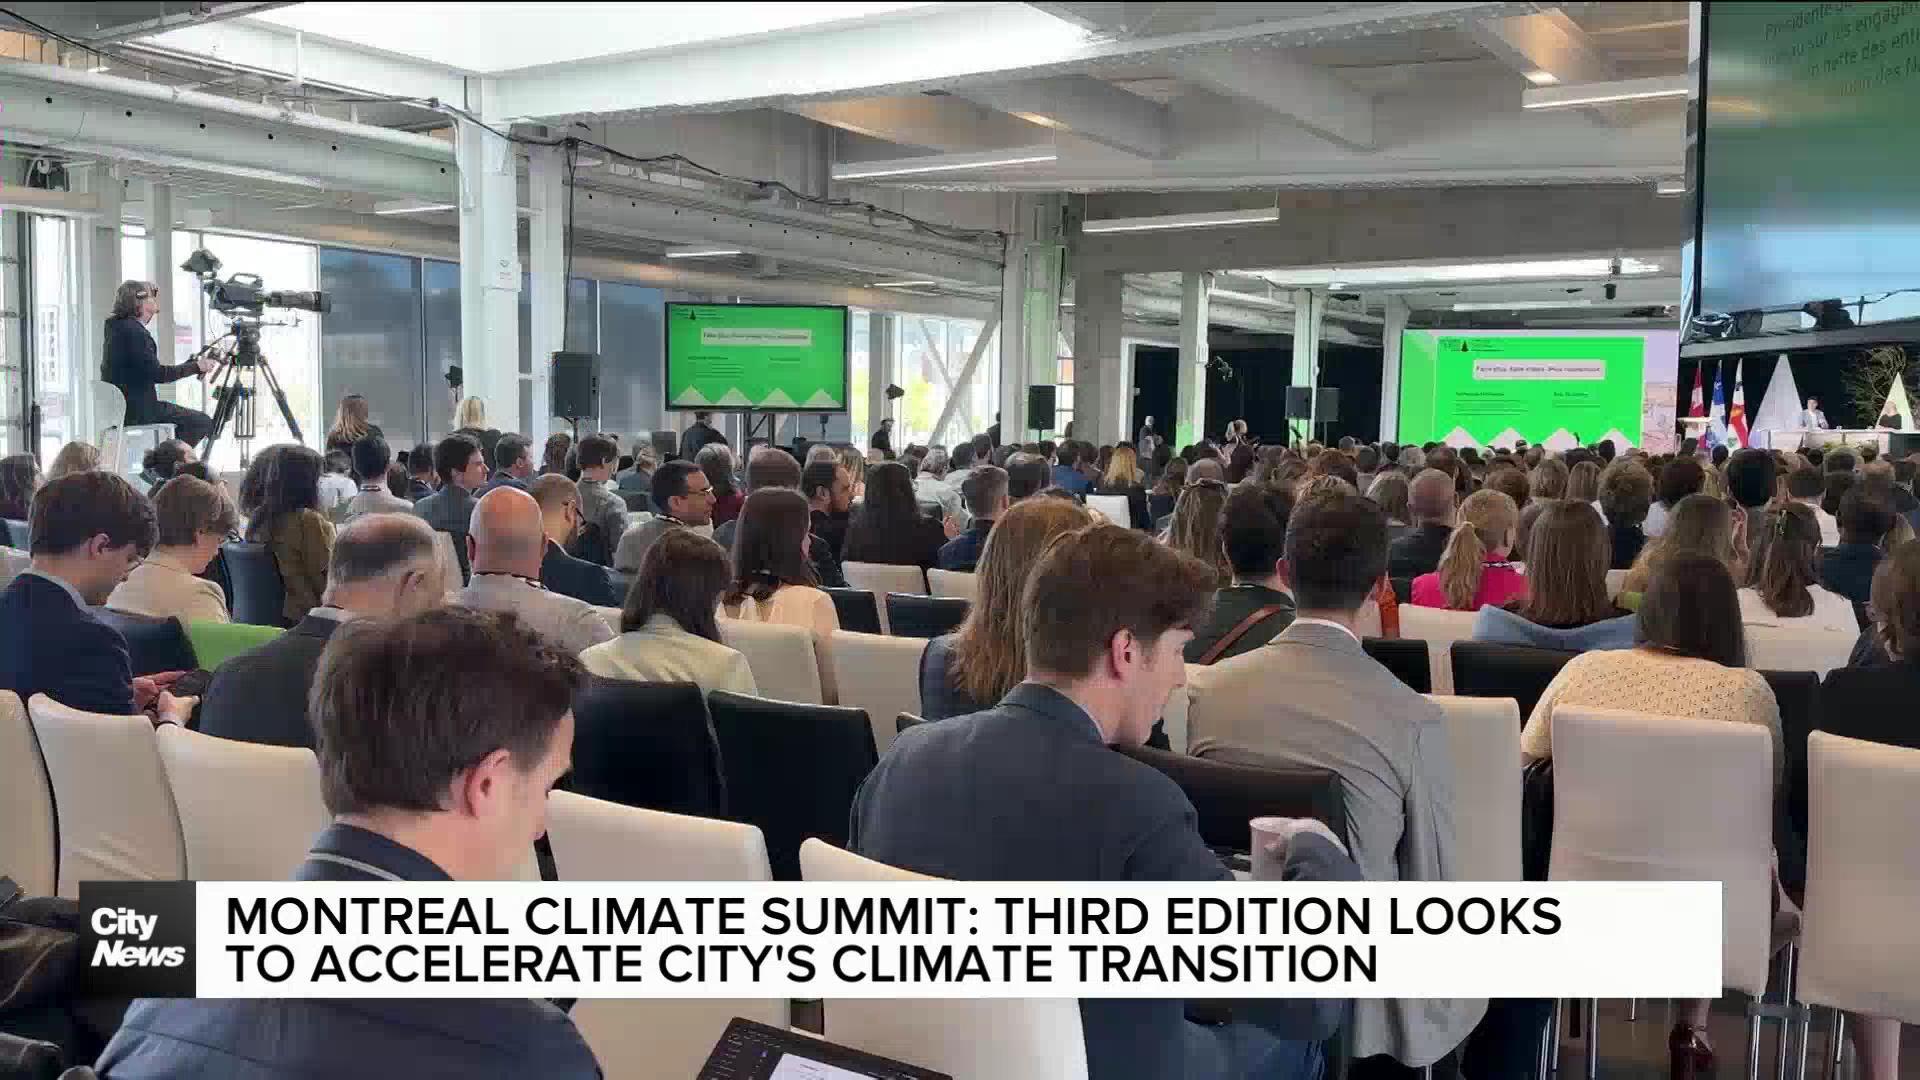 Montreal Climate Summit: third edition focusing on climate transition